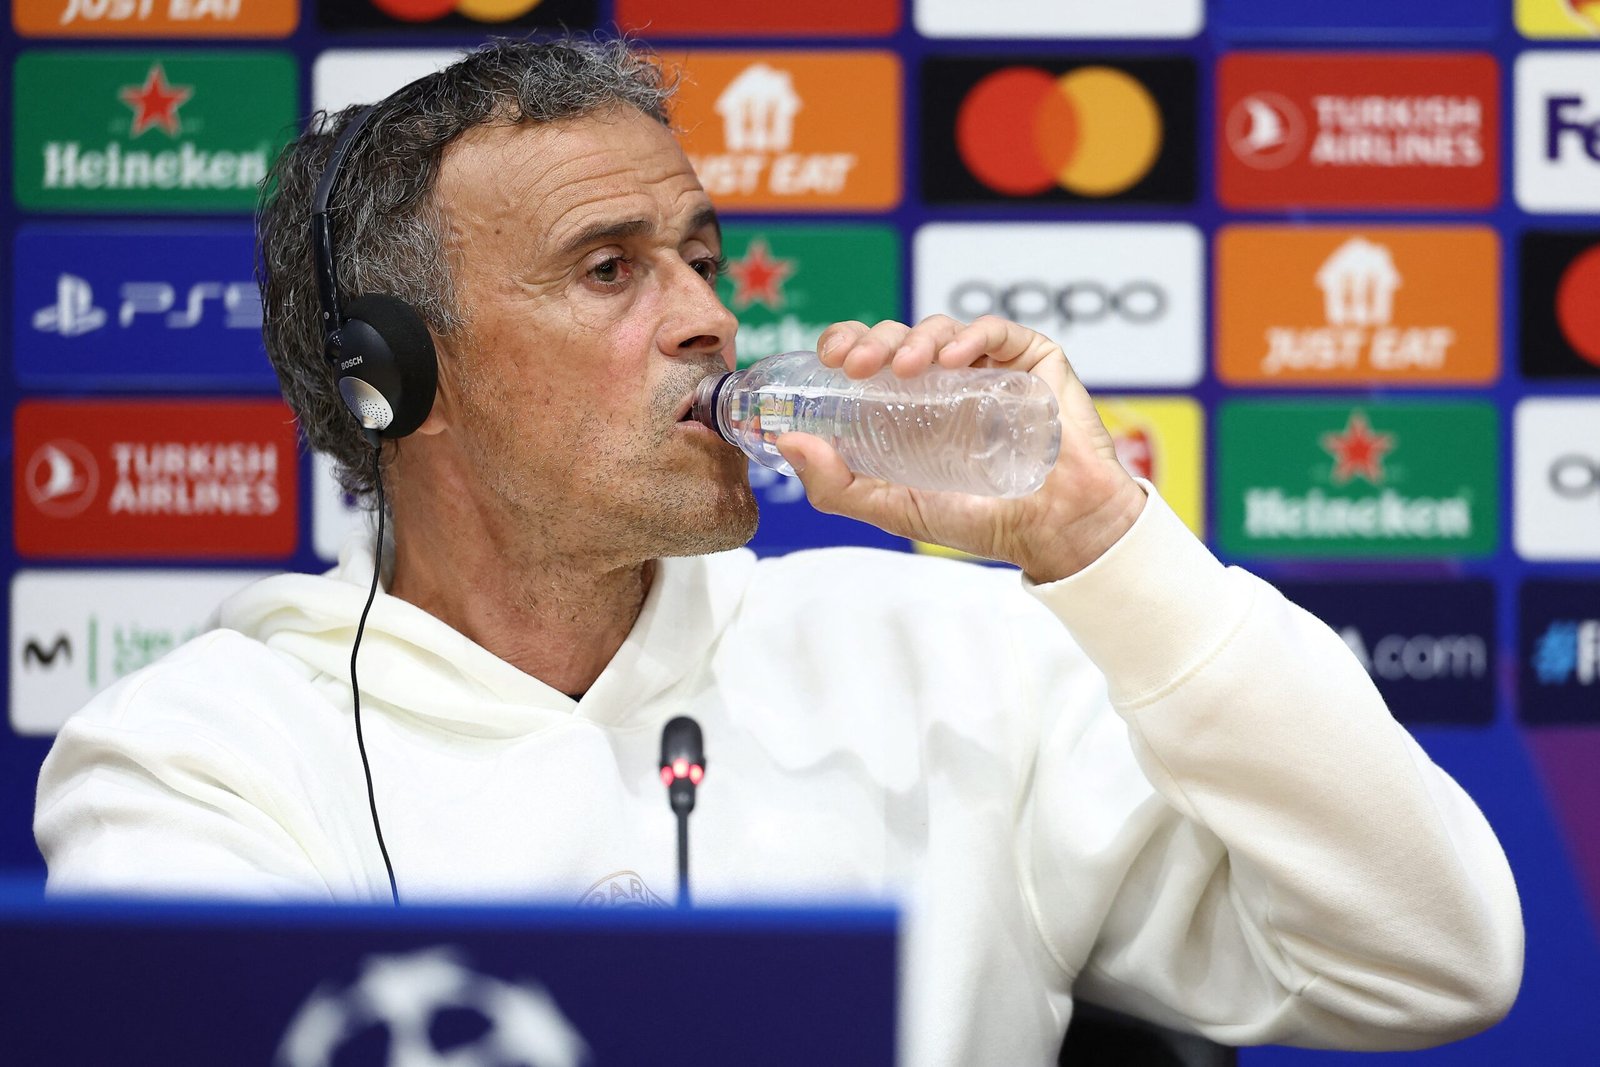 Paris Saint-Germain's Spanish headcoach Luis Enrique drinks water during a press conference on the eve of their UEFA Champions League quarter-final second leg football match against FC Barcelona at the Estadi Olimpic Lluis Companys in Barcelona on April 15, 2024. (Photo by FRANCK FIFE / AFP) (Photo by FRANCK FIFE/AFP via Getty Images)